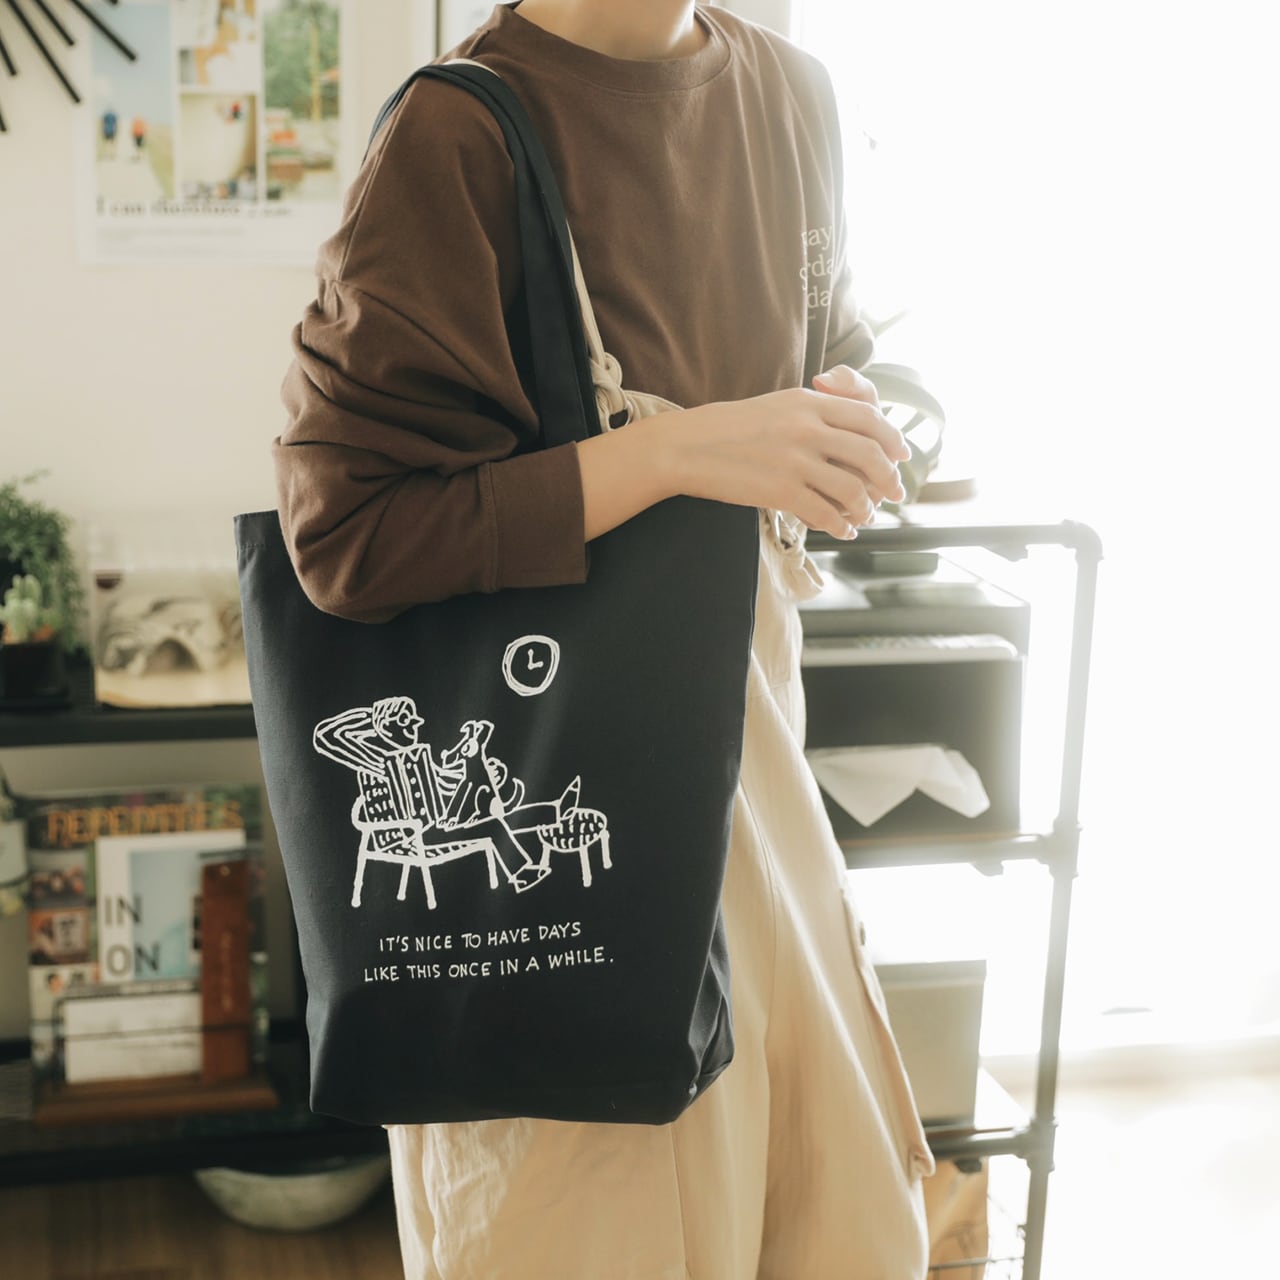 "It's nice to have days like this once in a while." Tote bag